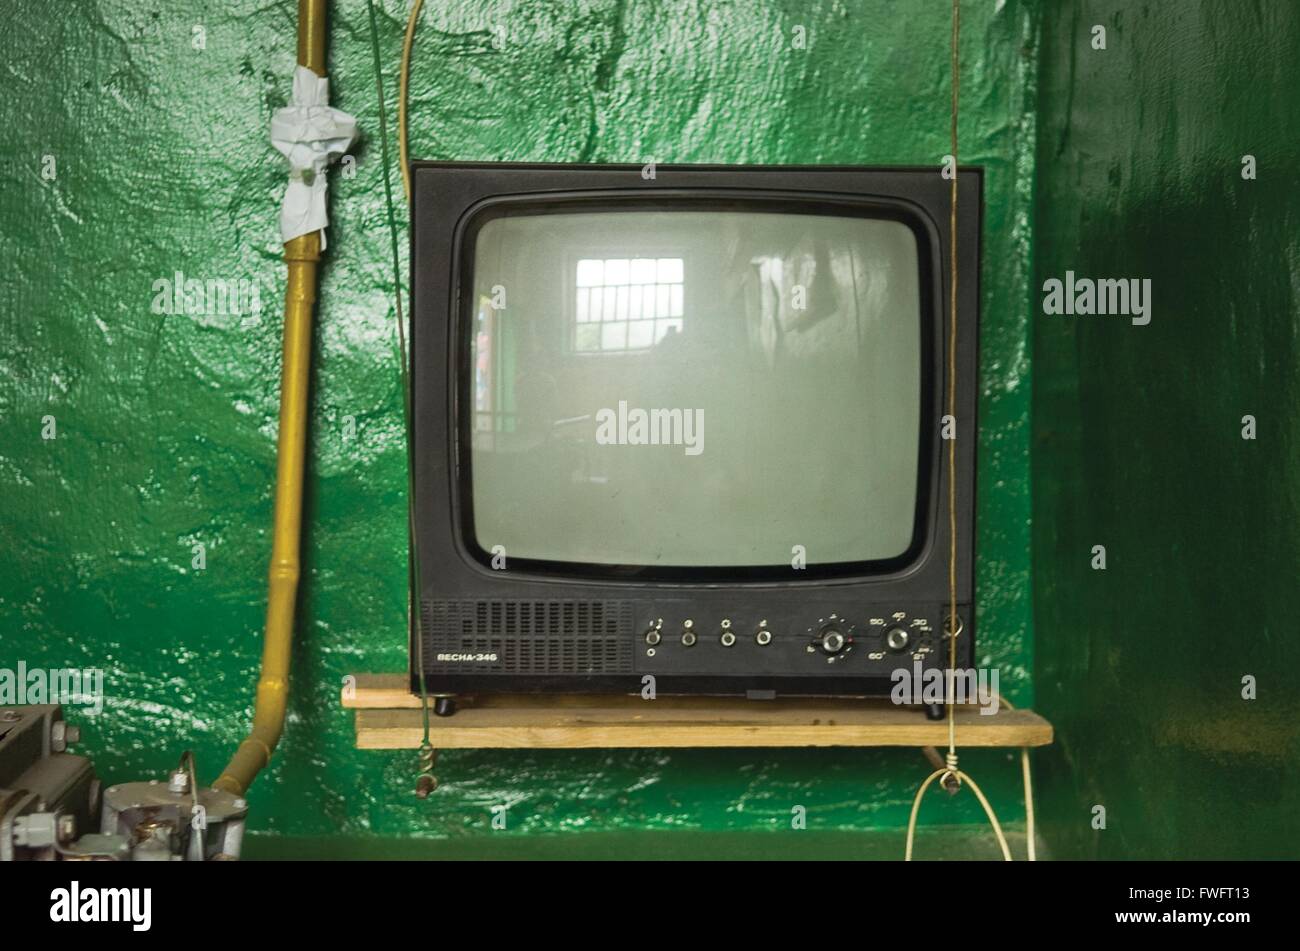 Tv set in the home of a Ukrainian family Stock Photo